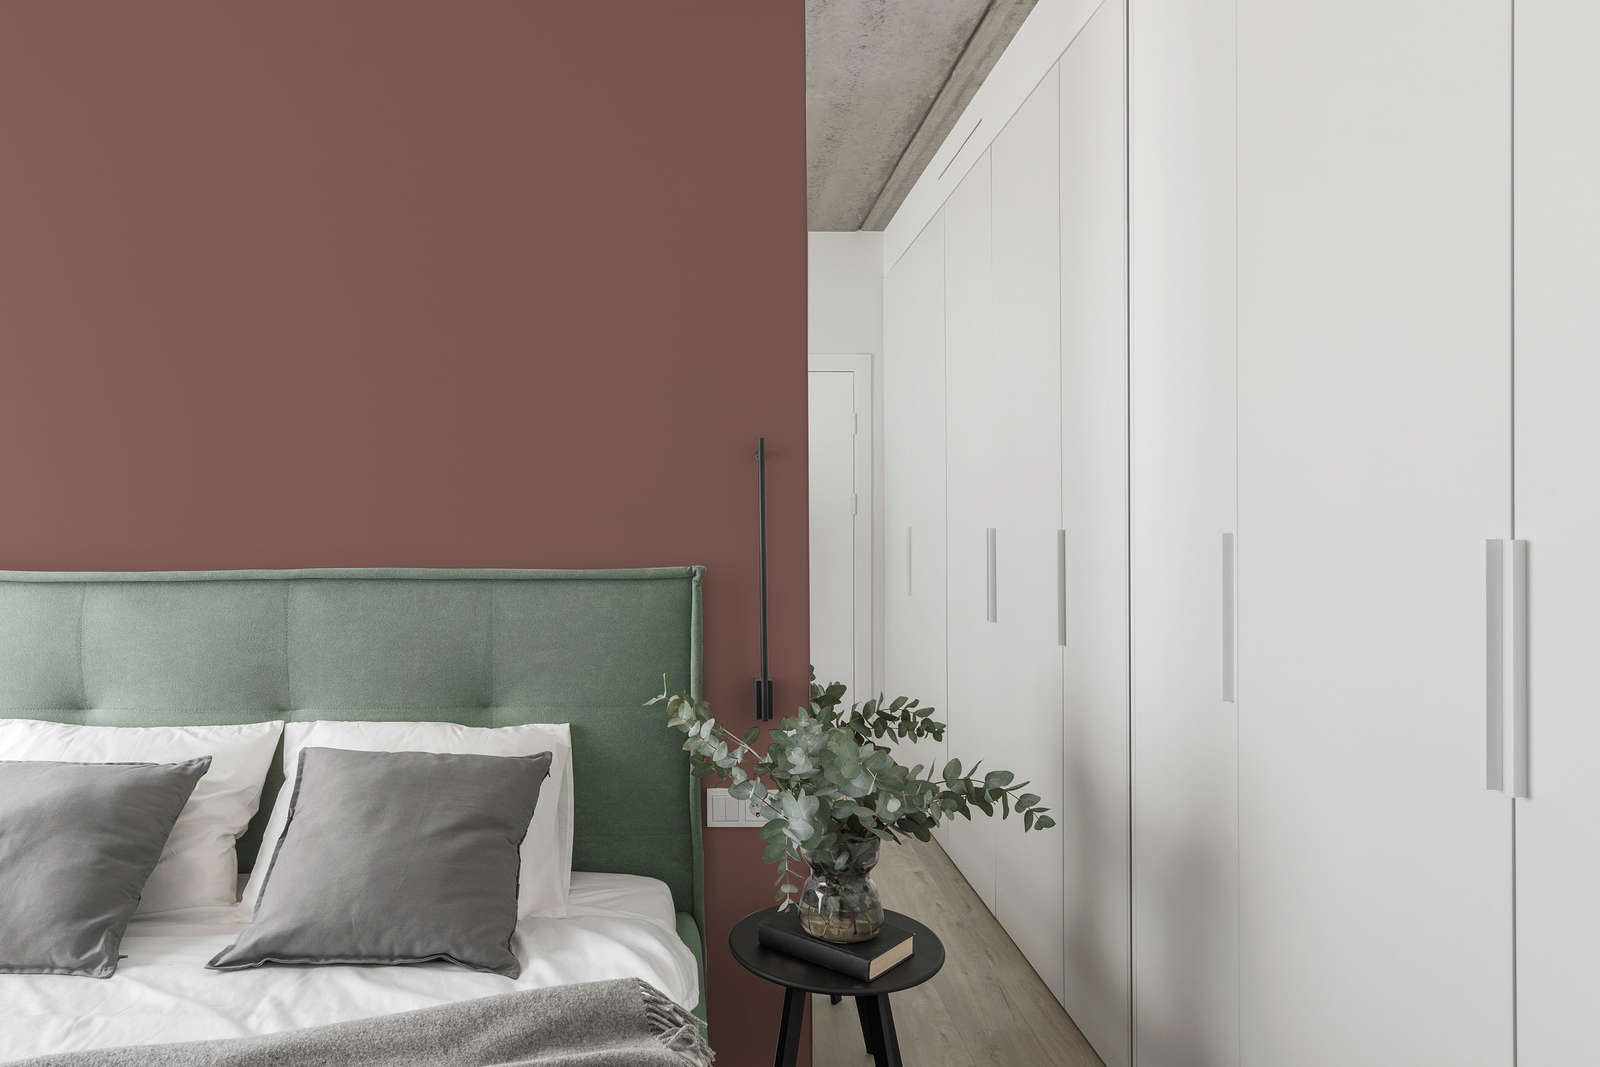             Premium Wall Paint Nature Dark Pink »Natural Nude« NW1012 – 5 litre
        